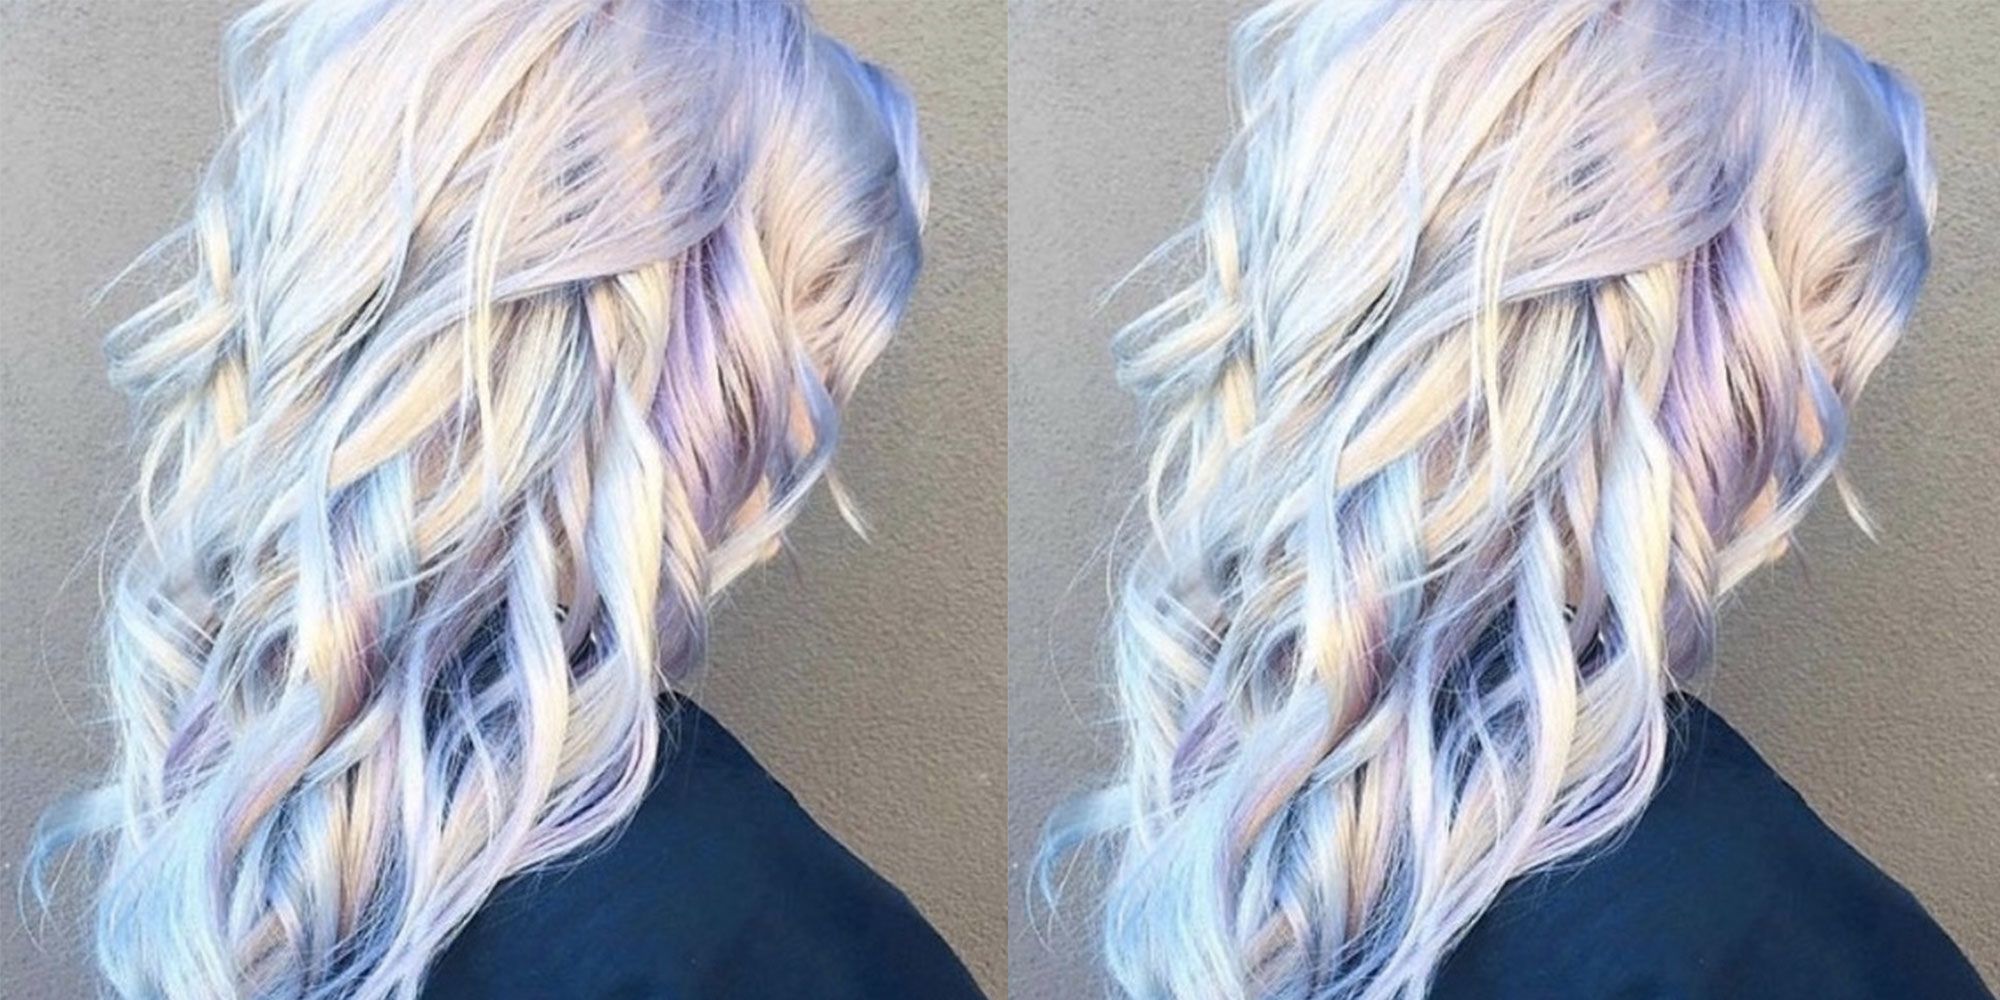 Holographic Hair Trend - Why It's The Pastel Rainbow Colour Trend We're On  Board With